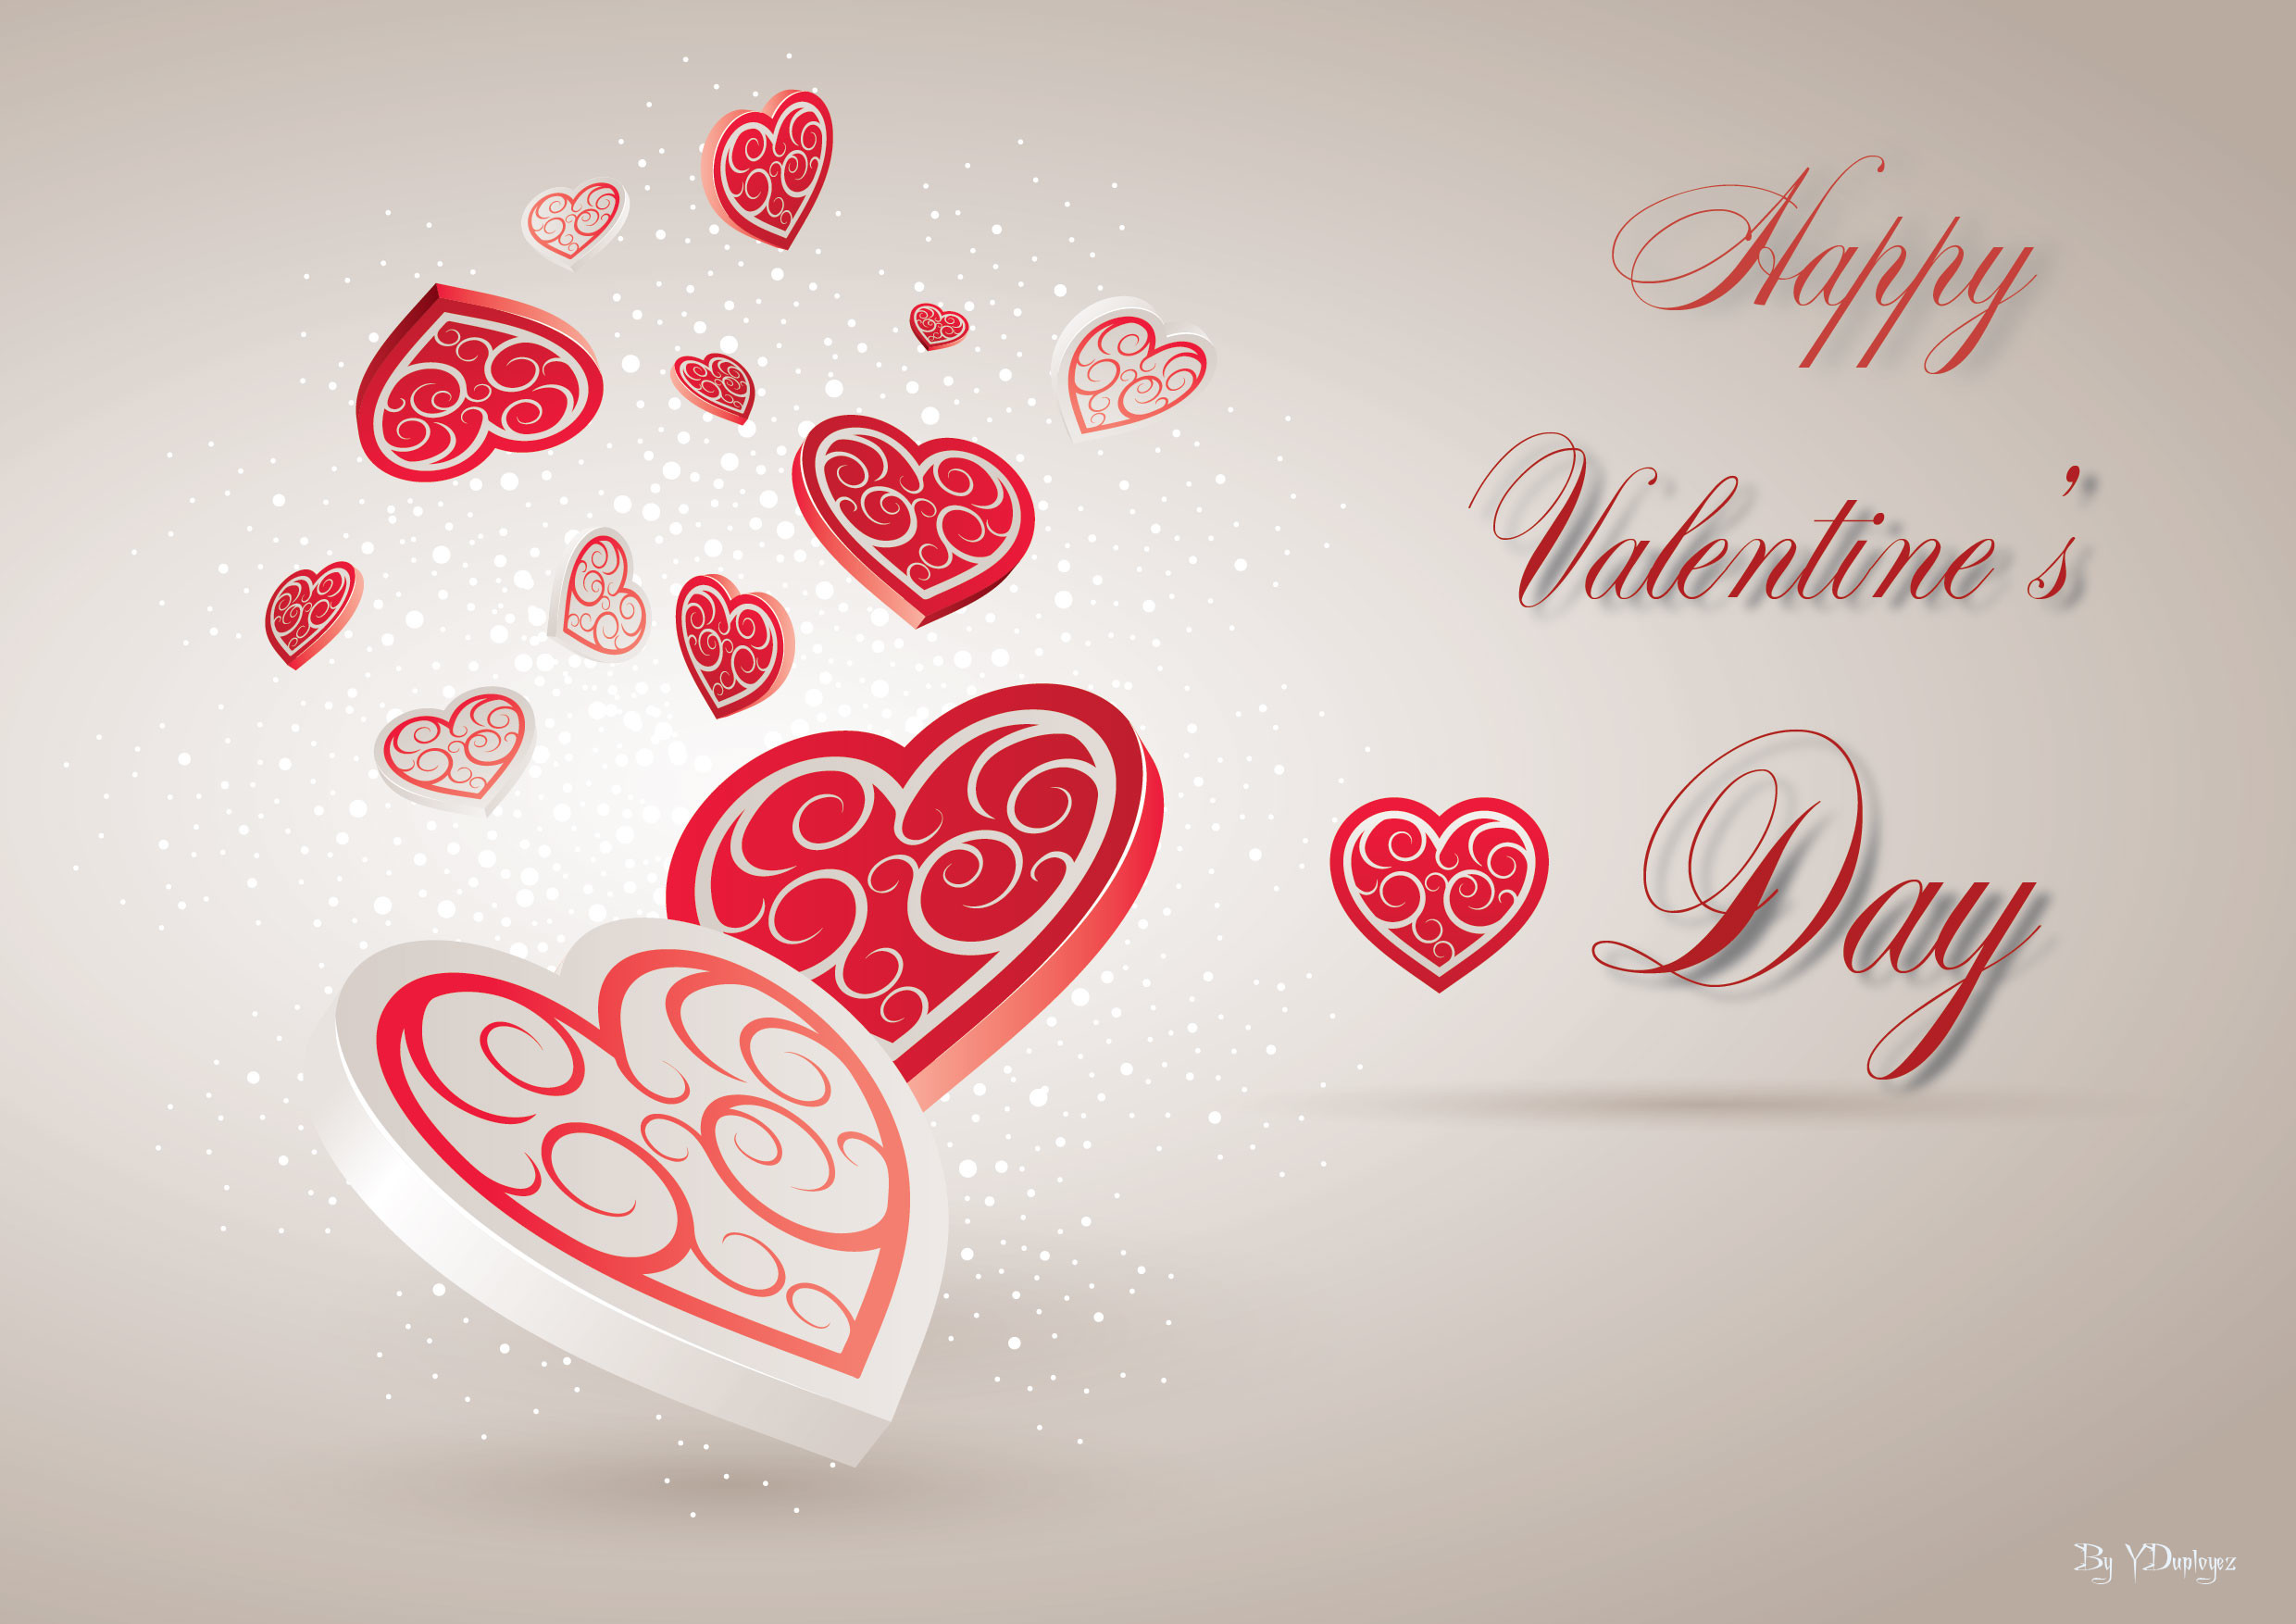 2480x1754 Wallpaper : wedding, red, cute, love, sign, illustration, poster, happy,  typography, design, shiny, day, friendship, heart, affection, symbol,  decorative, ...